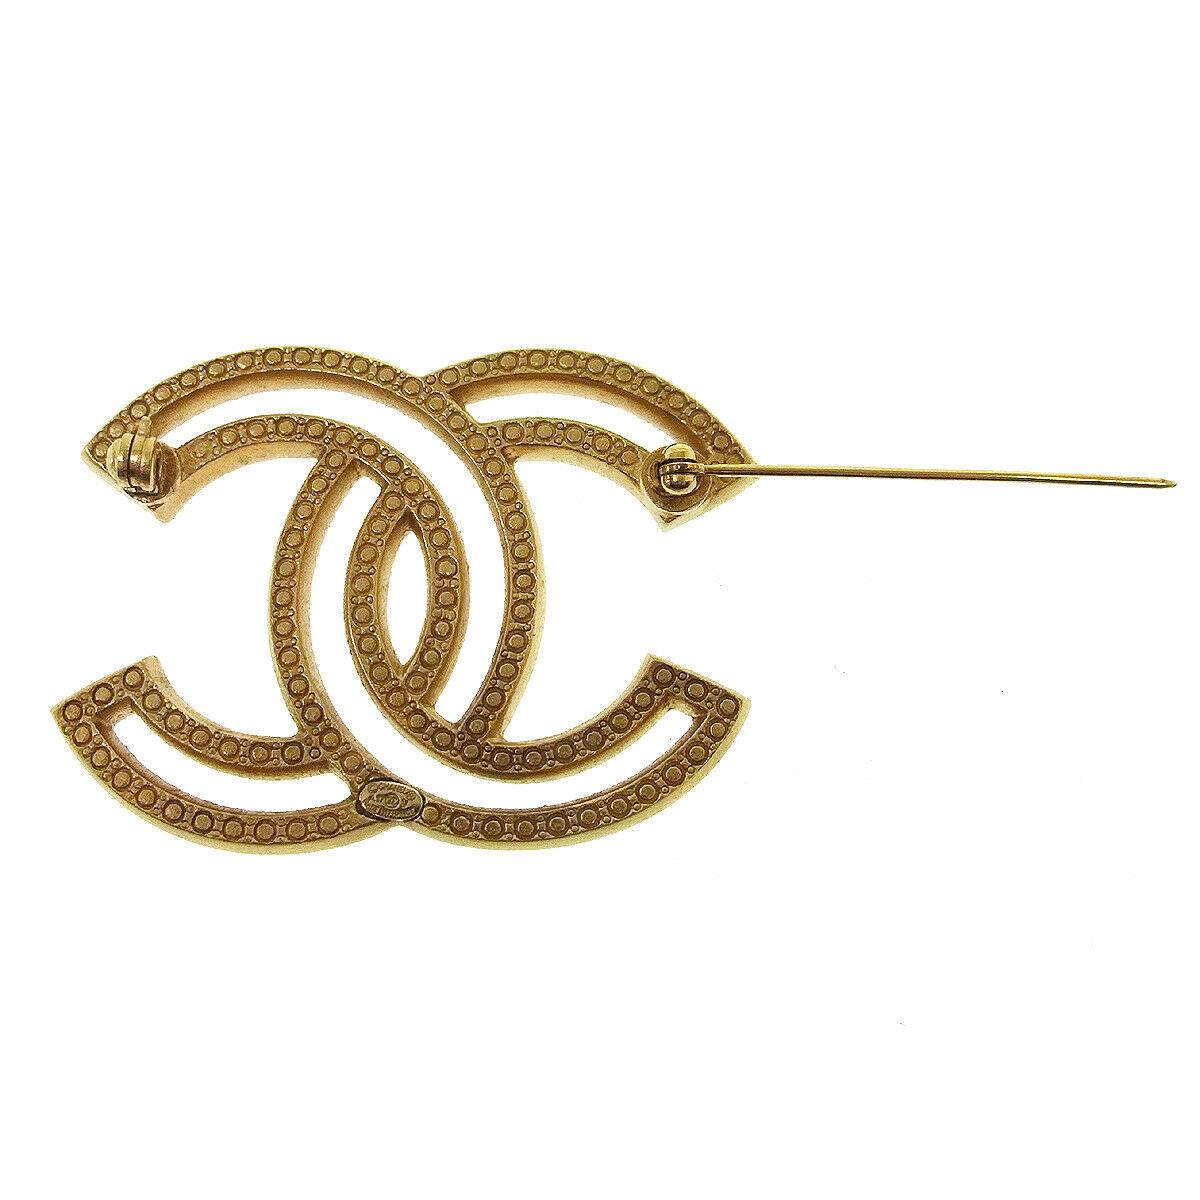 Chanel Gold Rhinestone Charm Lapel Evening Pin Brooch

Metal
Rhinestone
Gold tone hardware
Date code present
Made in France
Measures 2